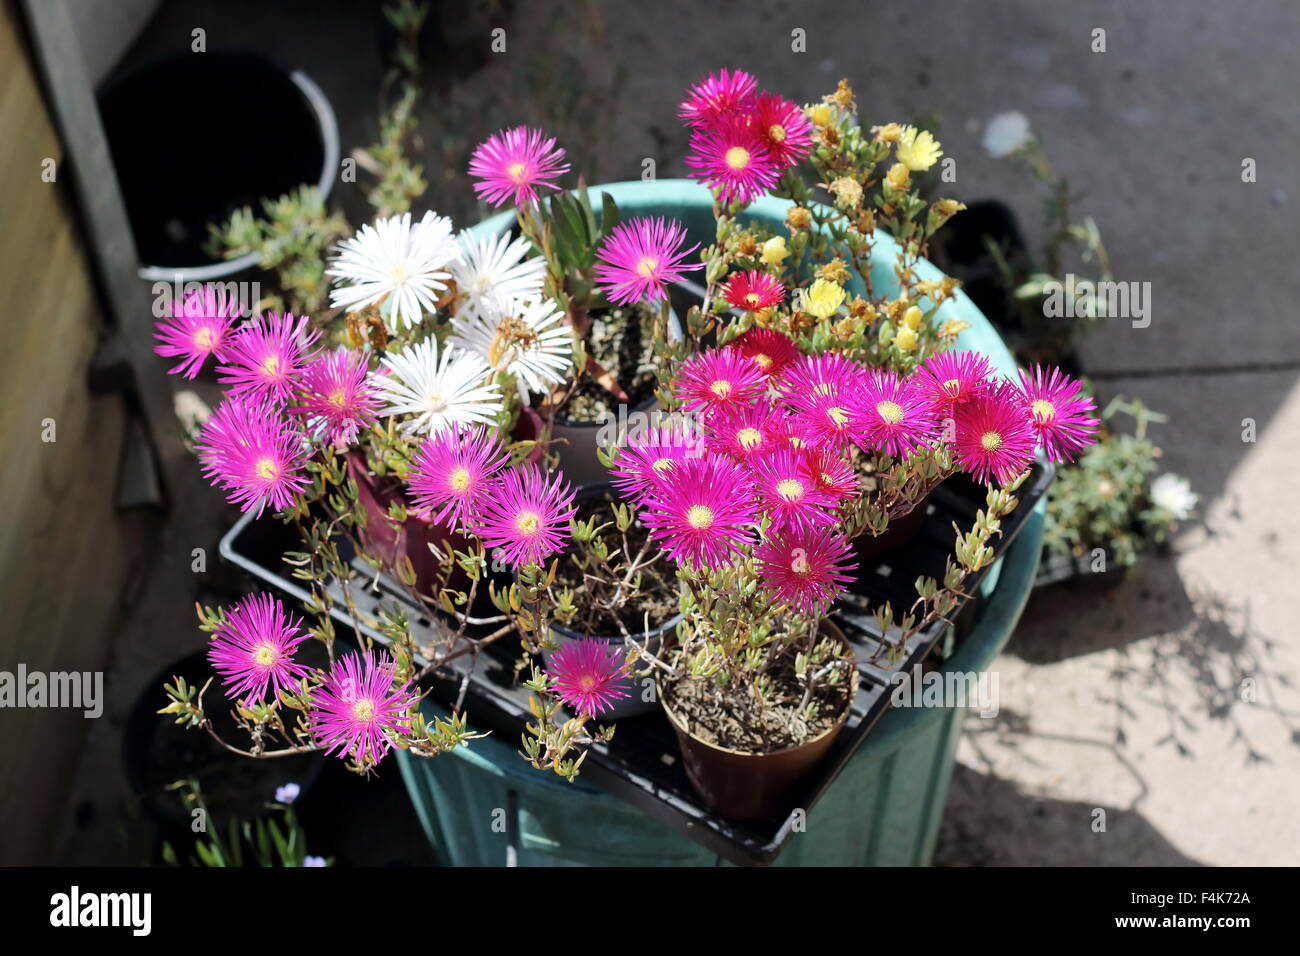 White, Red and Pink Pig face flowers or Mesembryanthemum , ice plant flowers, Livingstone Daisies in full bloom Stock Photo